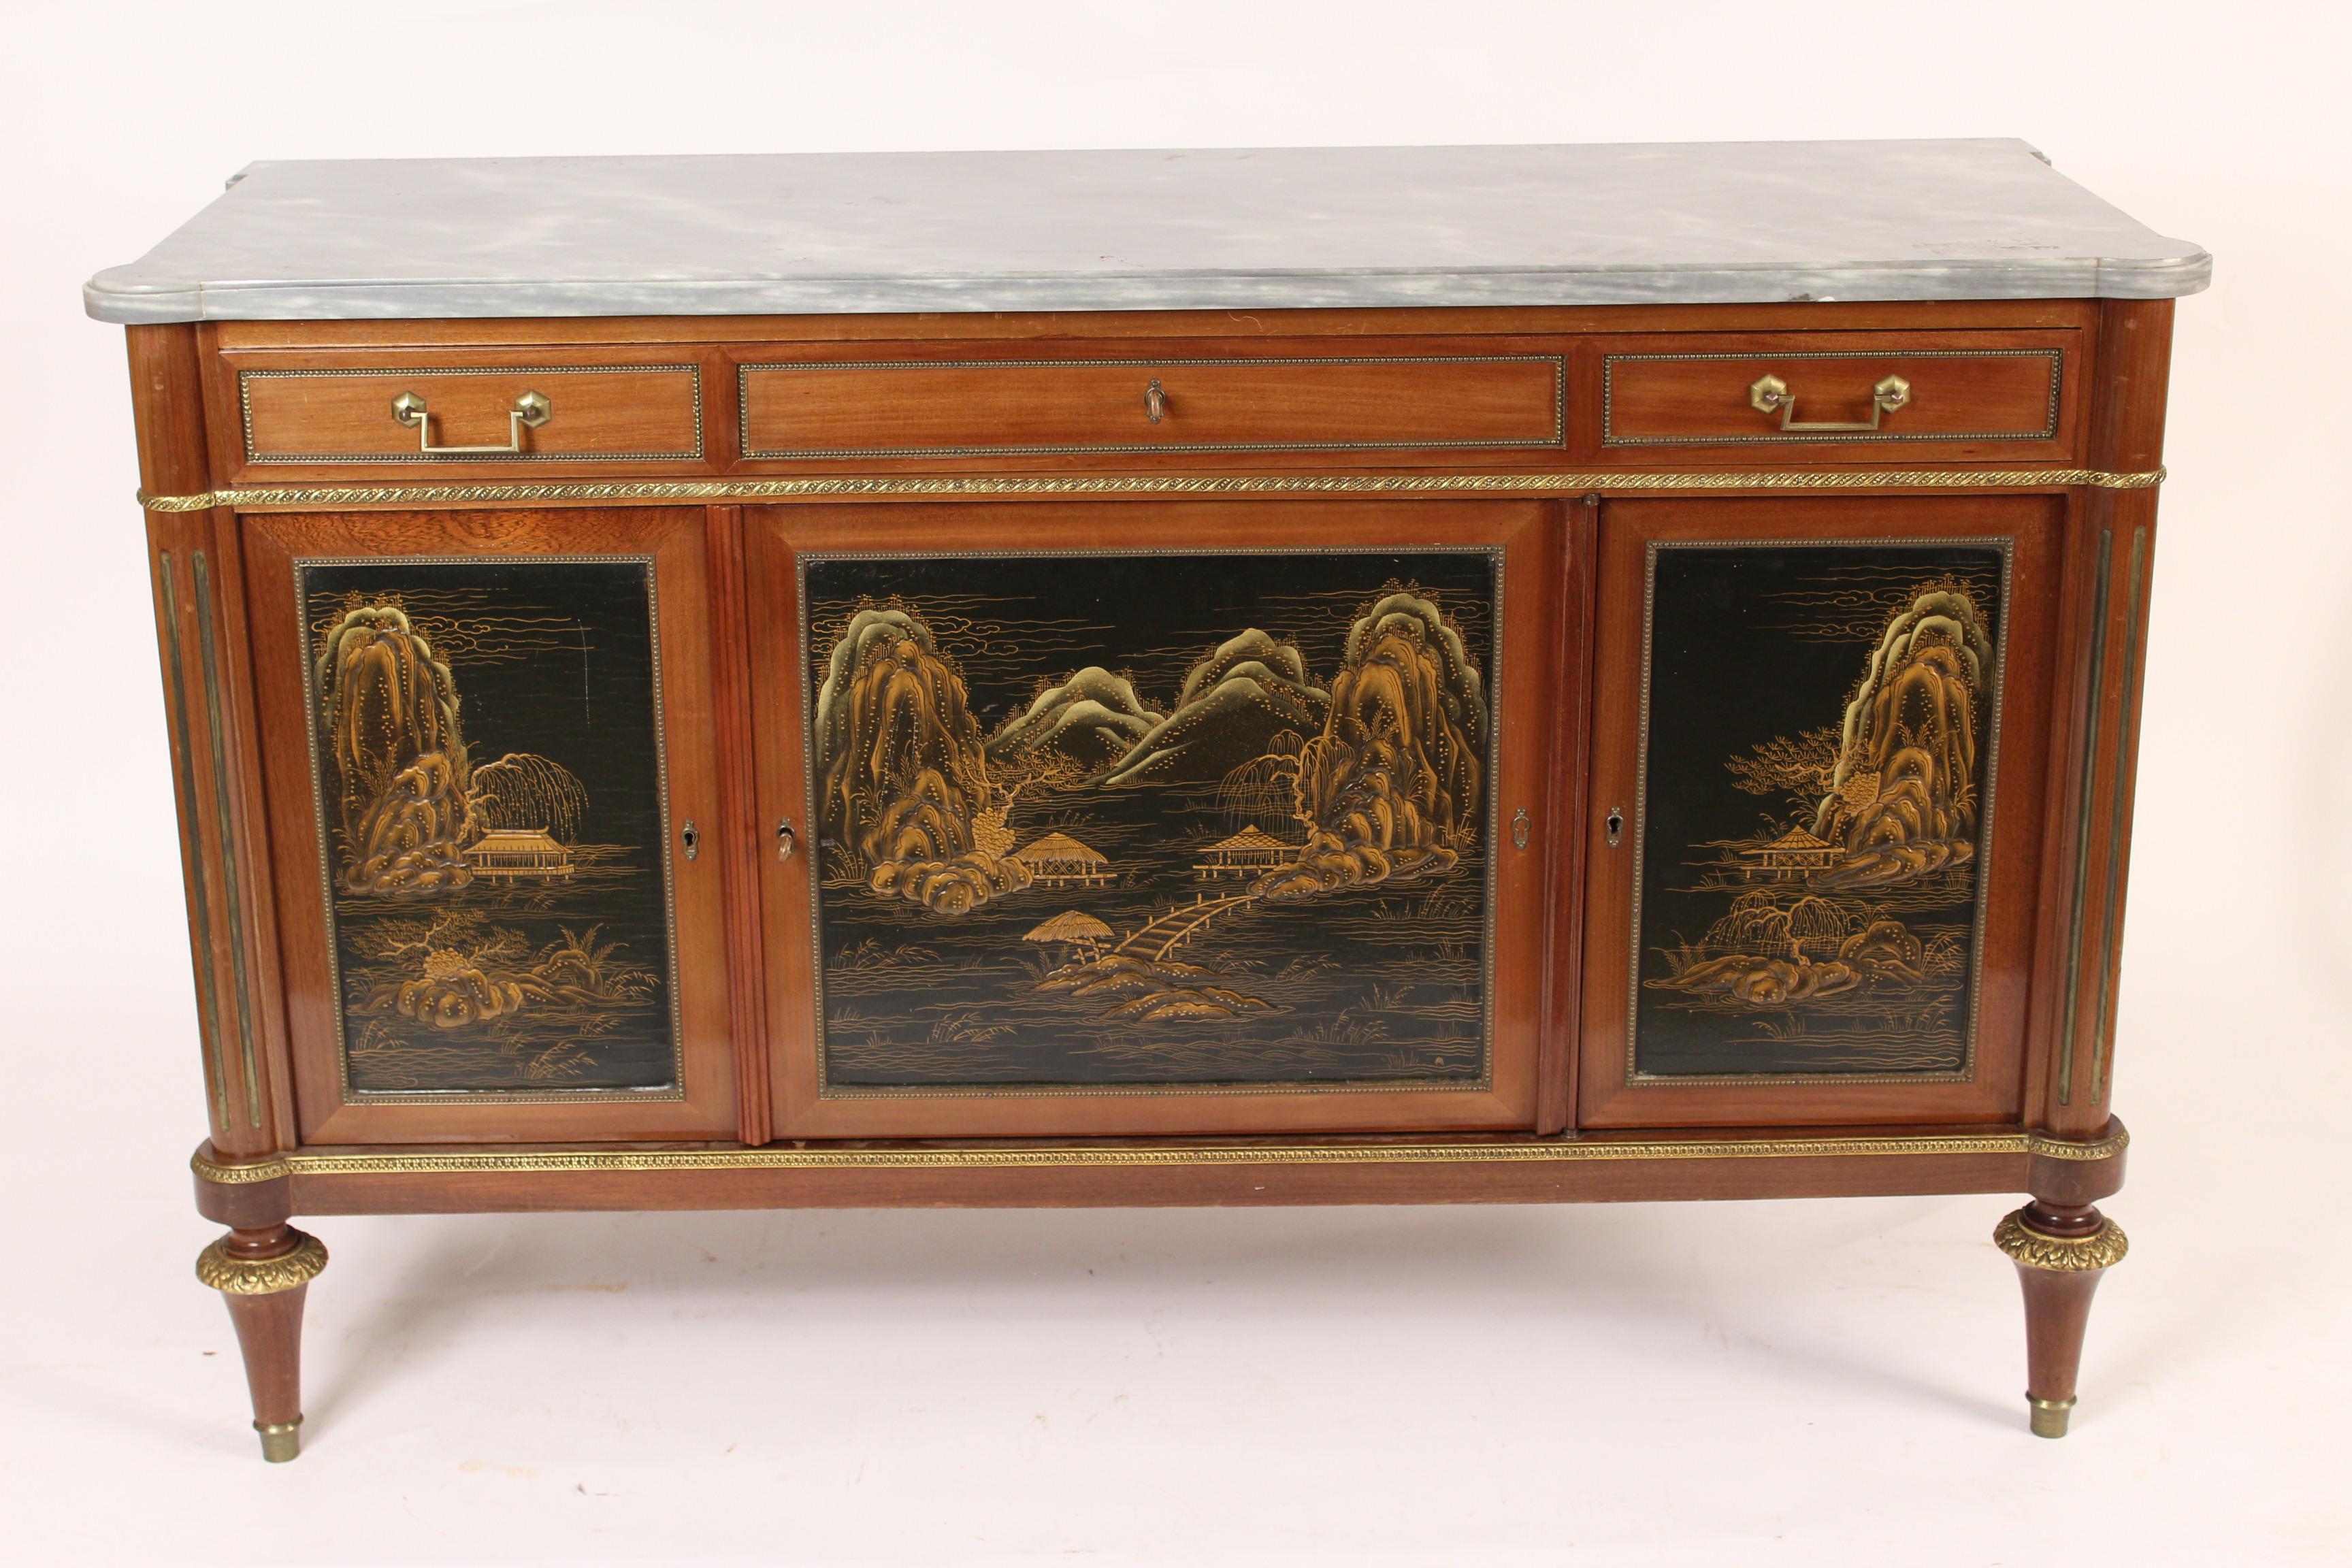 Louis XVI style mahogany buffet with raised chinoiserie decorations, gilt bronze mounts and a marble top, mid-20th century.